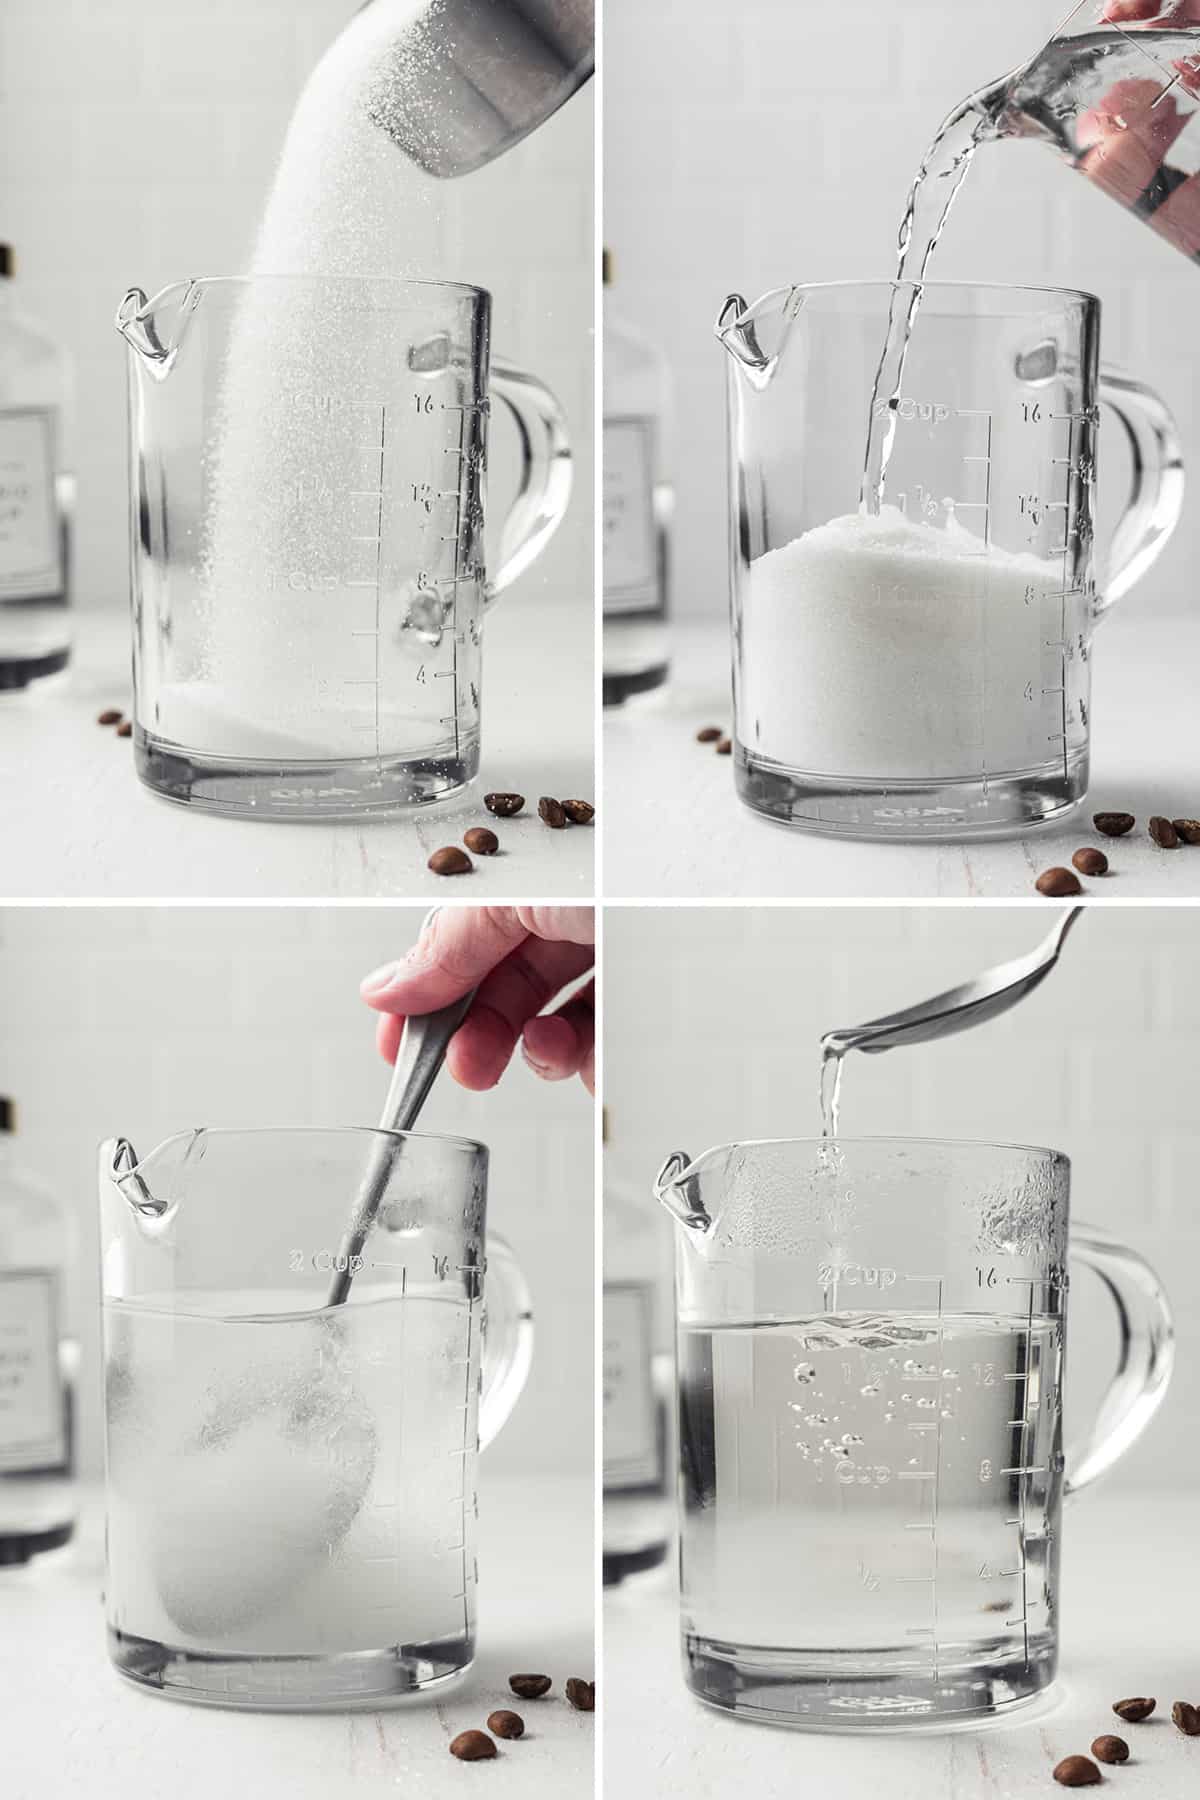 Sugar poured into glass measuring cup, stirred with water.